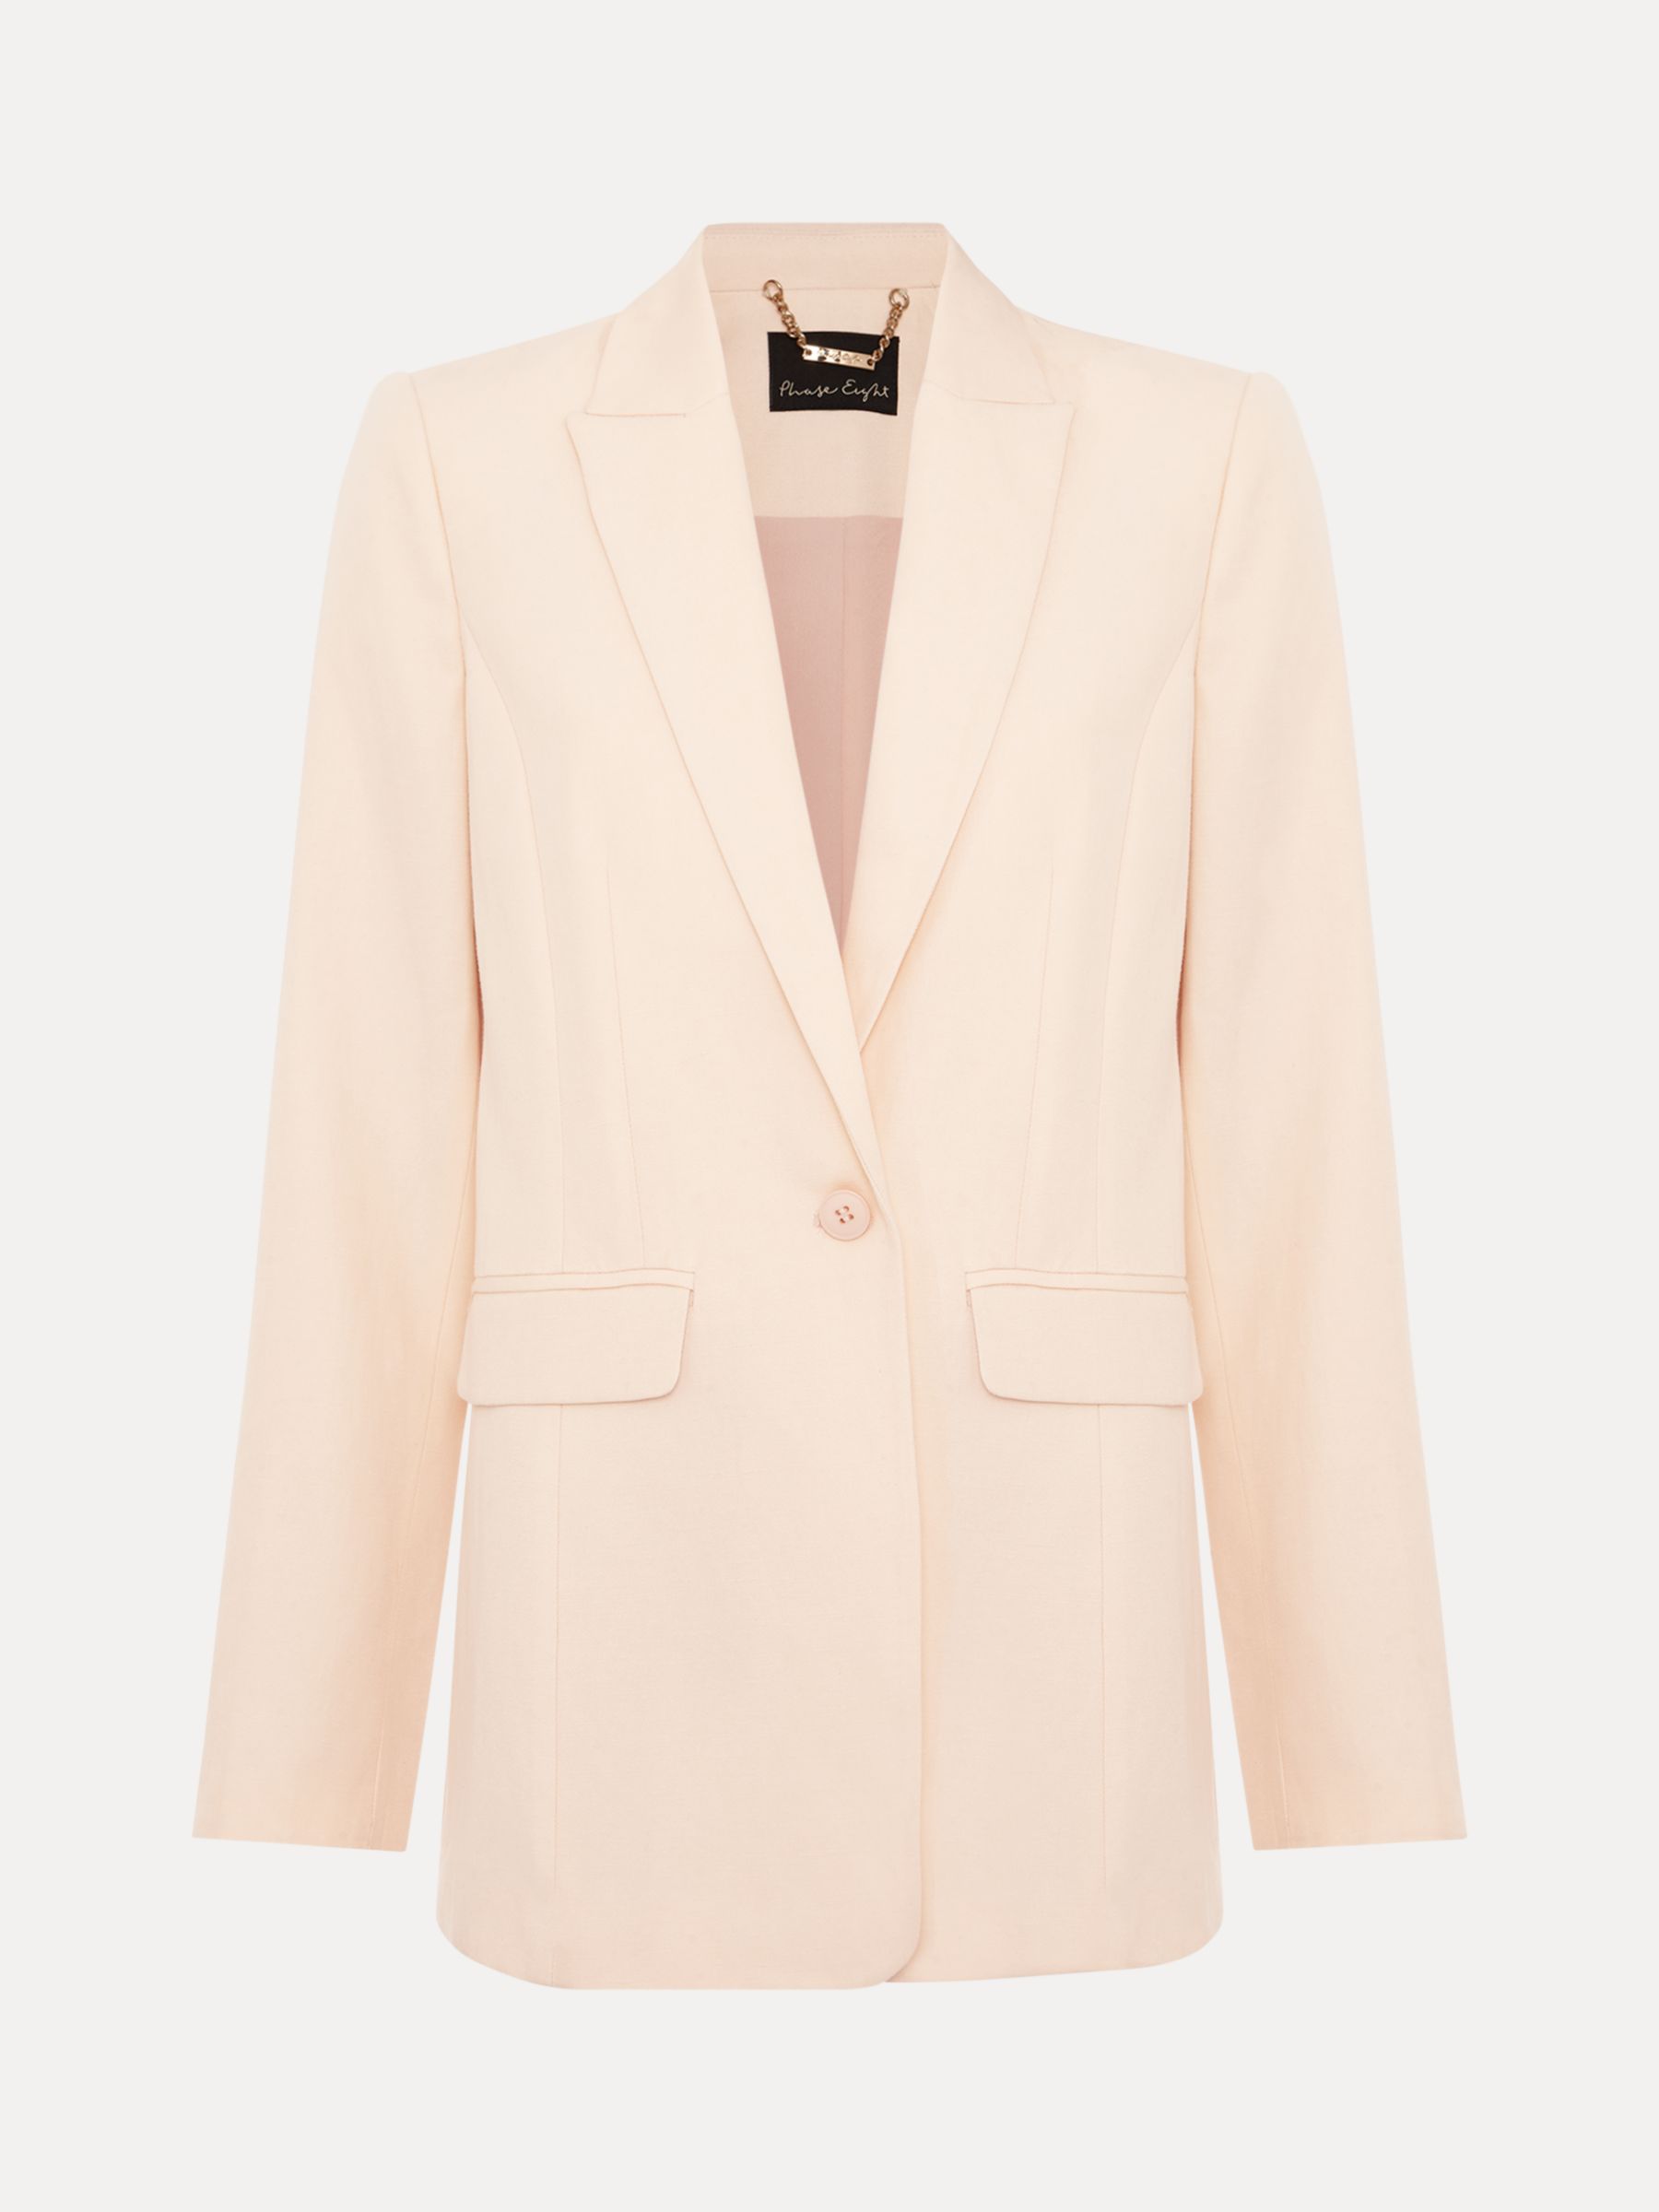 Buy Phase Eight Bianca Suit Jacket, Soft Peach Online at johnlewis.com